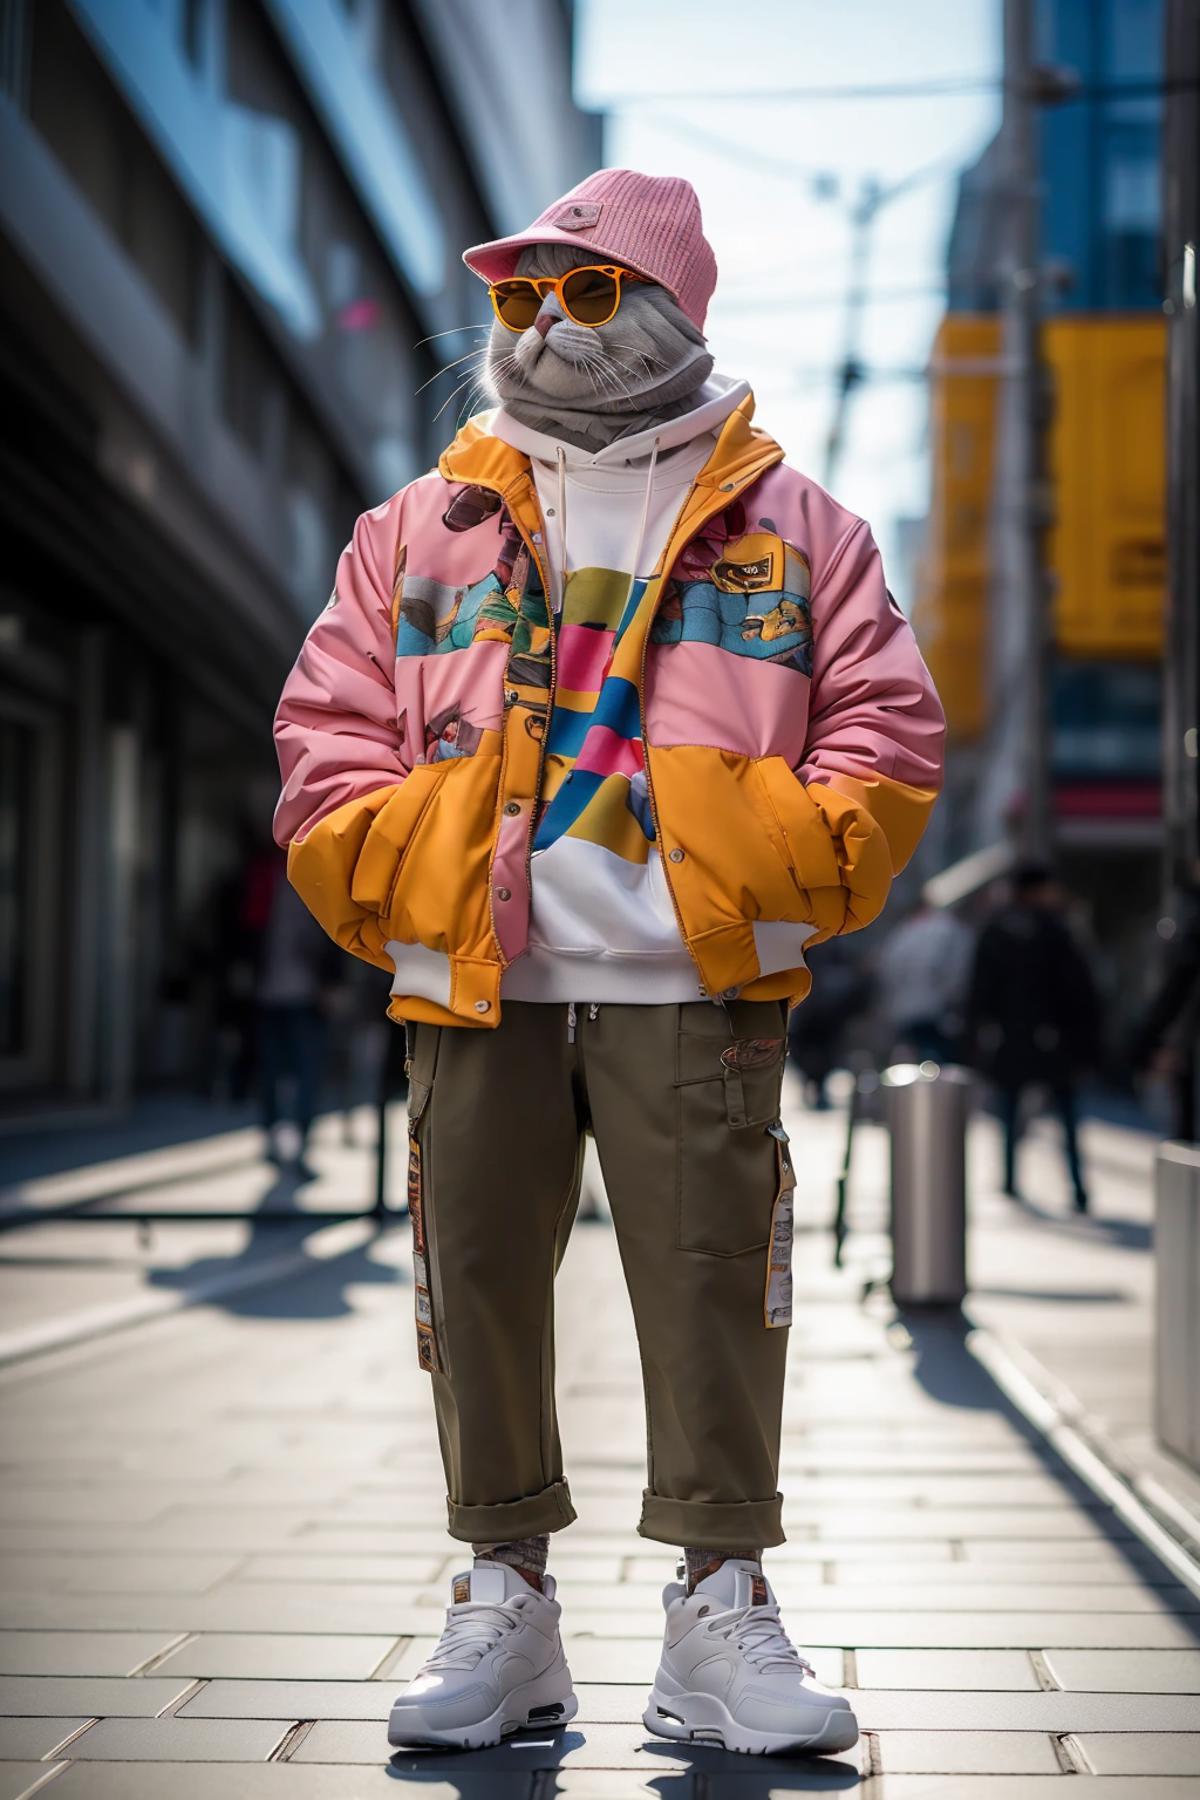 A person wearing a colorful jacket and sunglasses standing on a sidewalk.